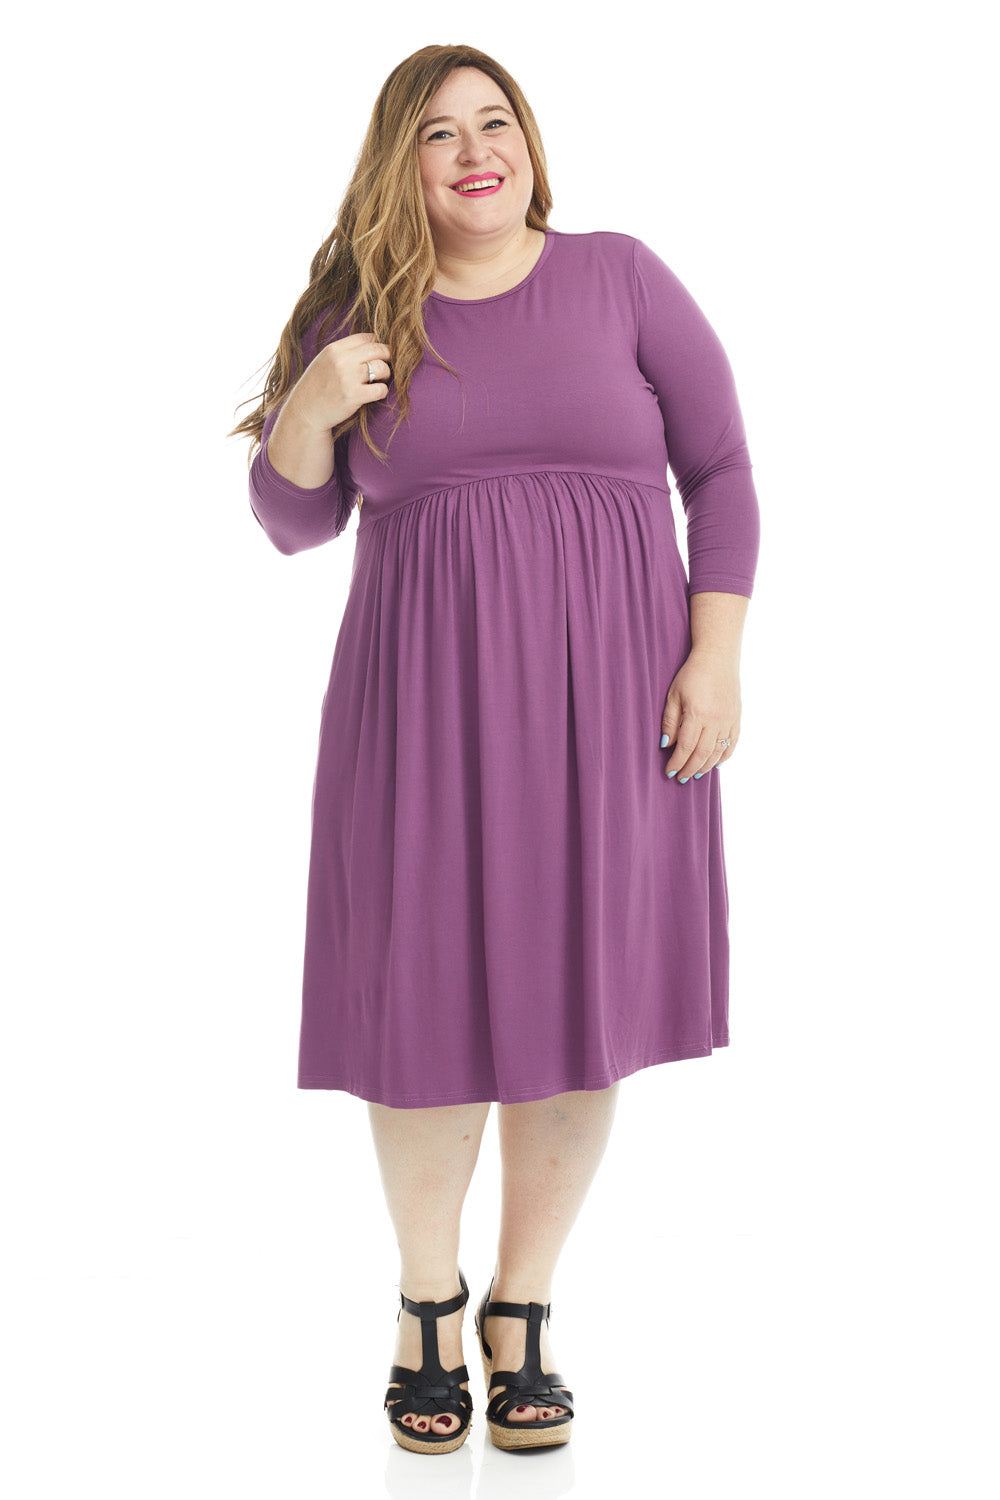 modest 3/4 sleeve below the knee plus size swing dress with pockets